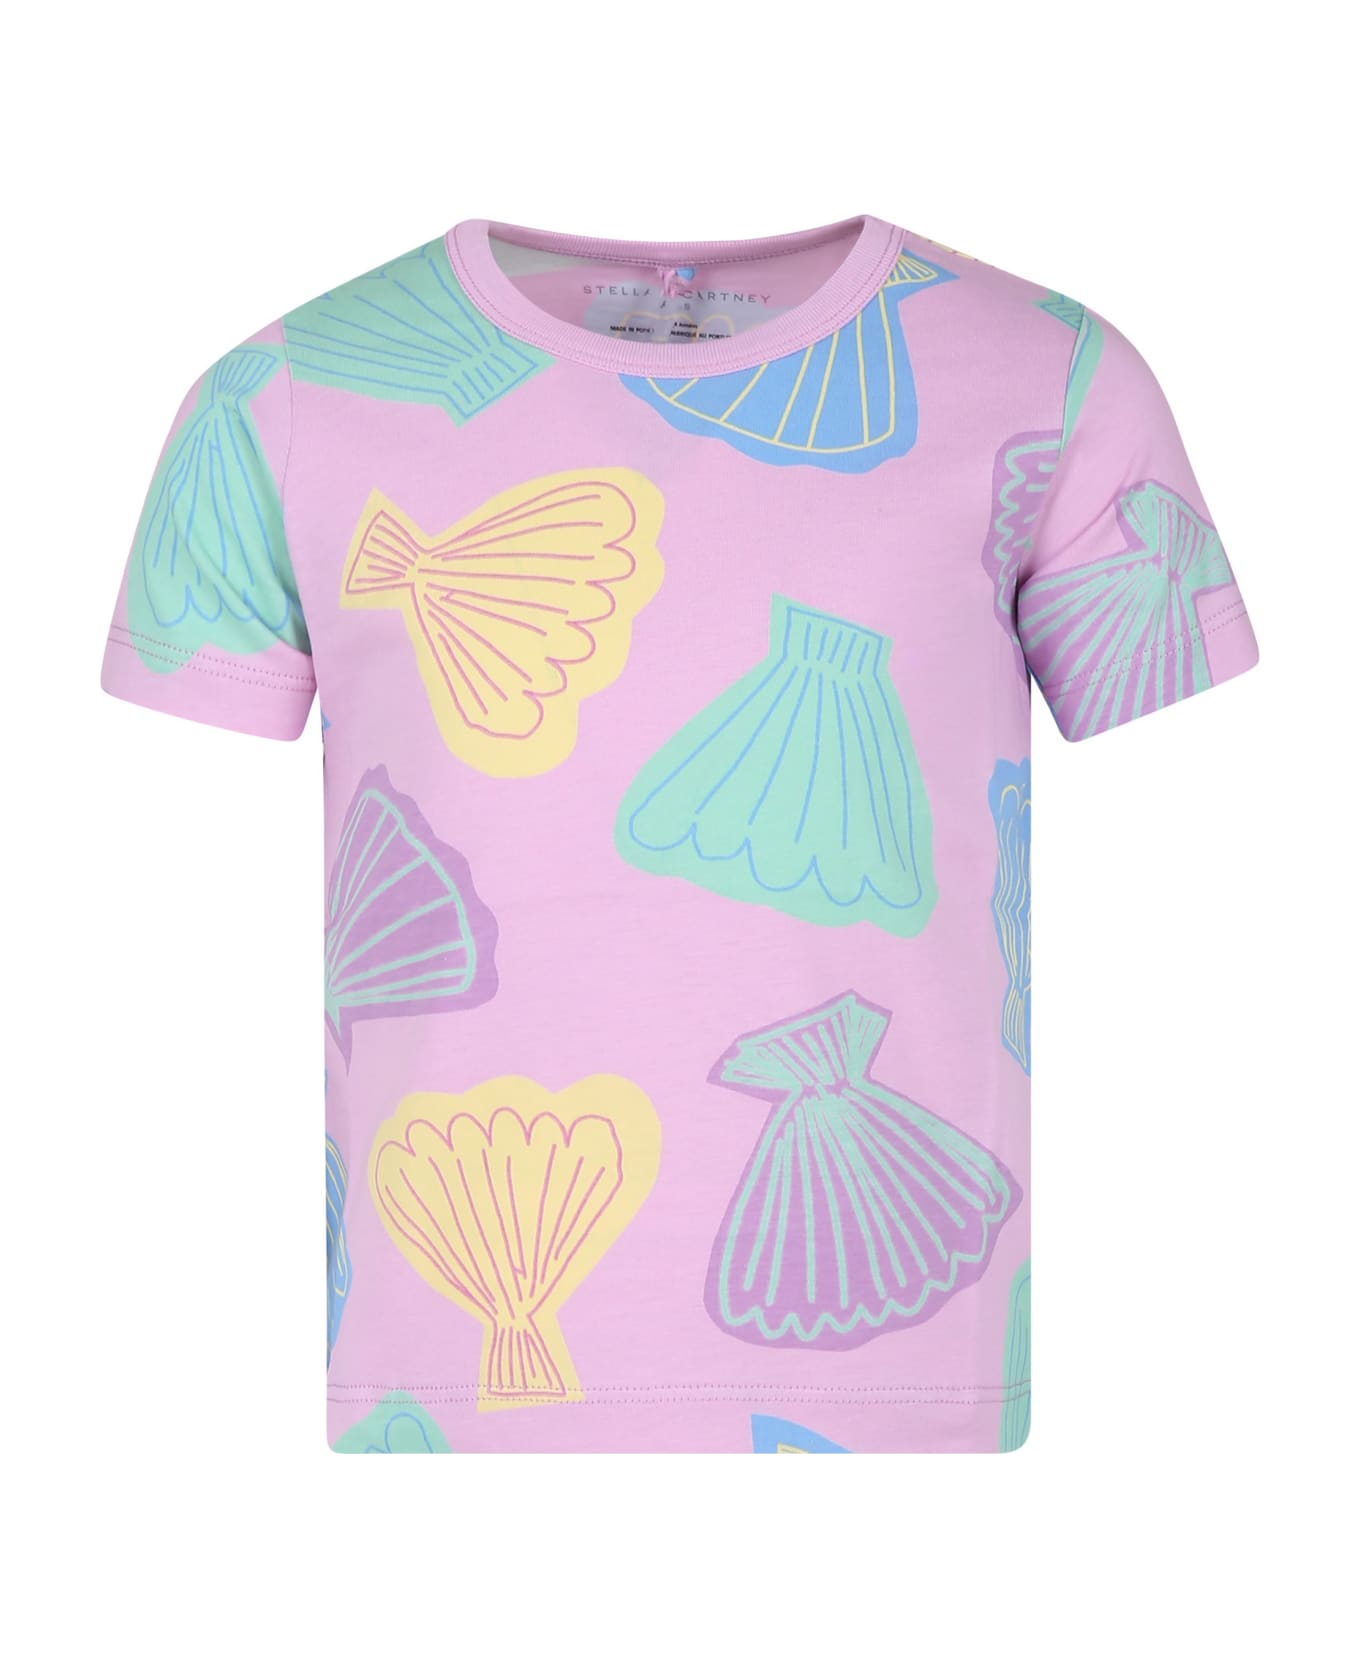 Stella McCartney Kids Pink T-shirt For Girl With Shell Print - Pink